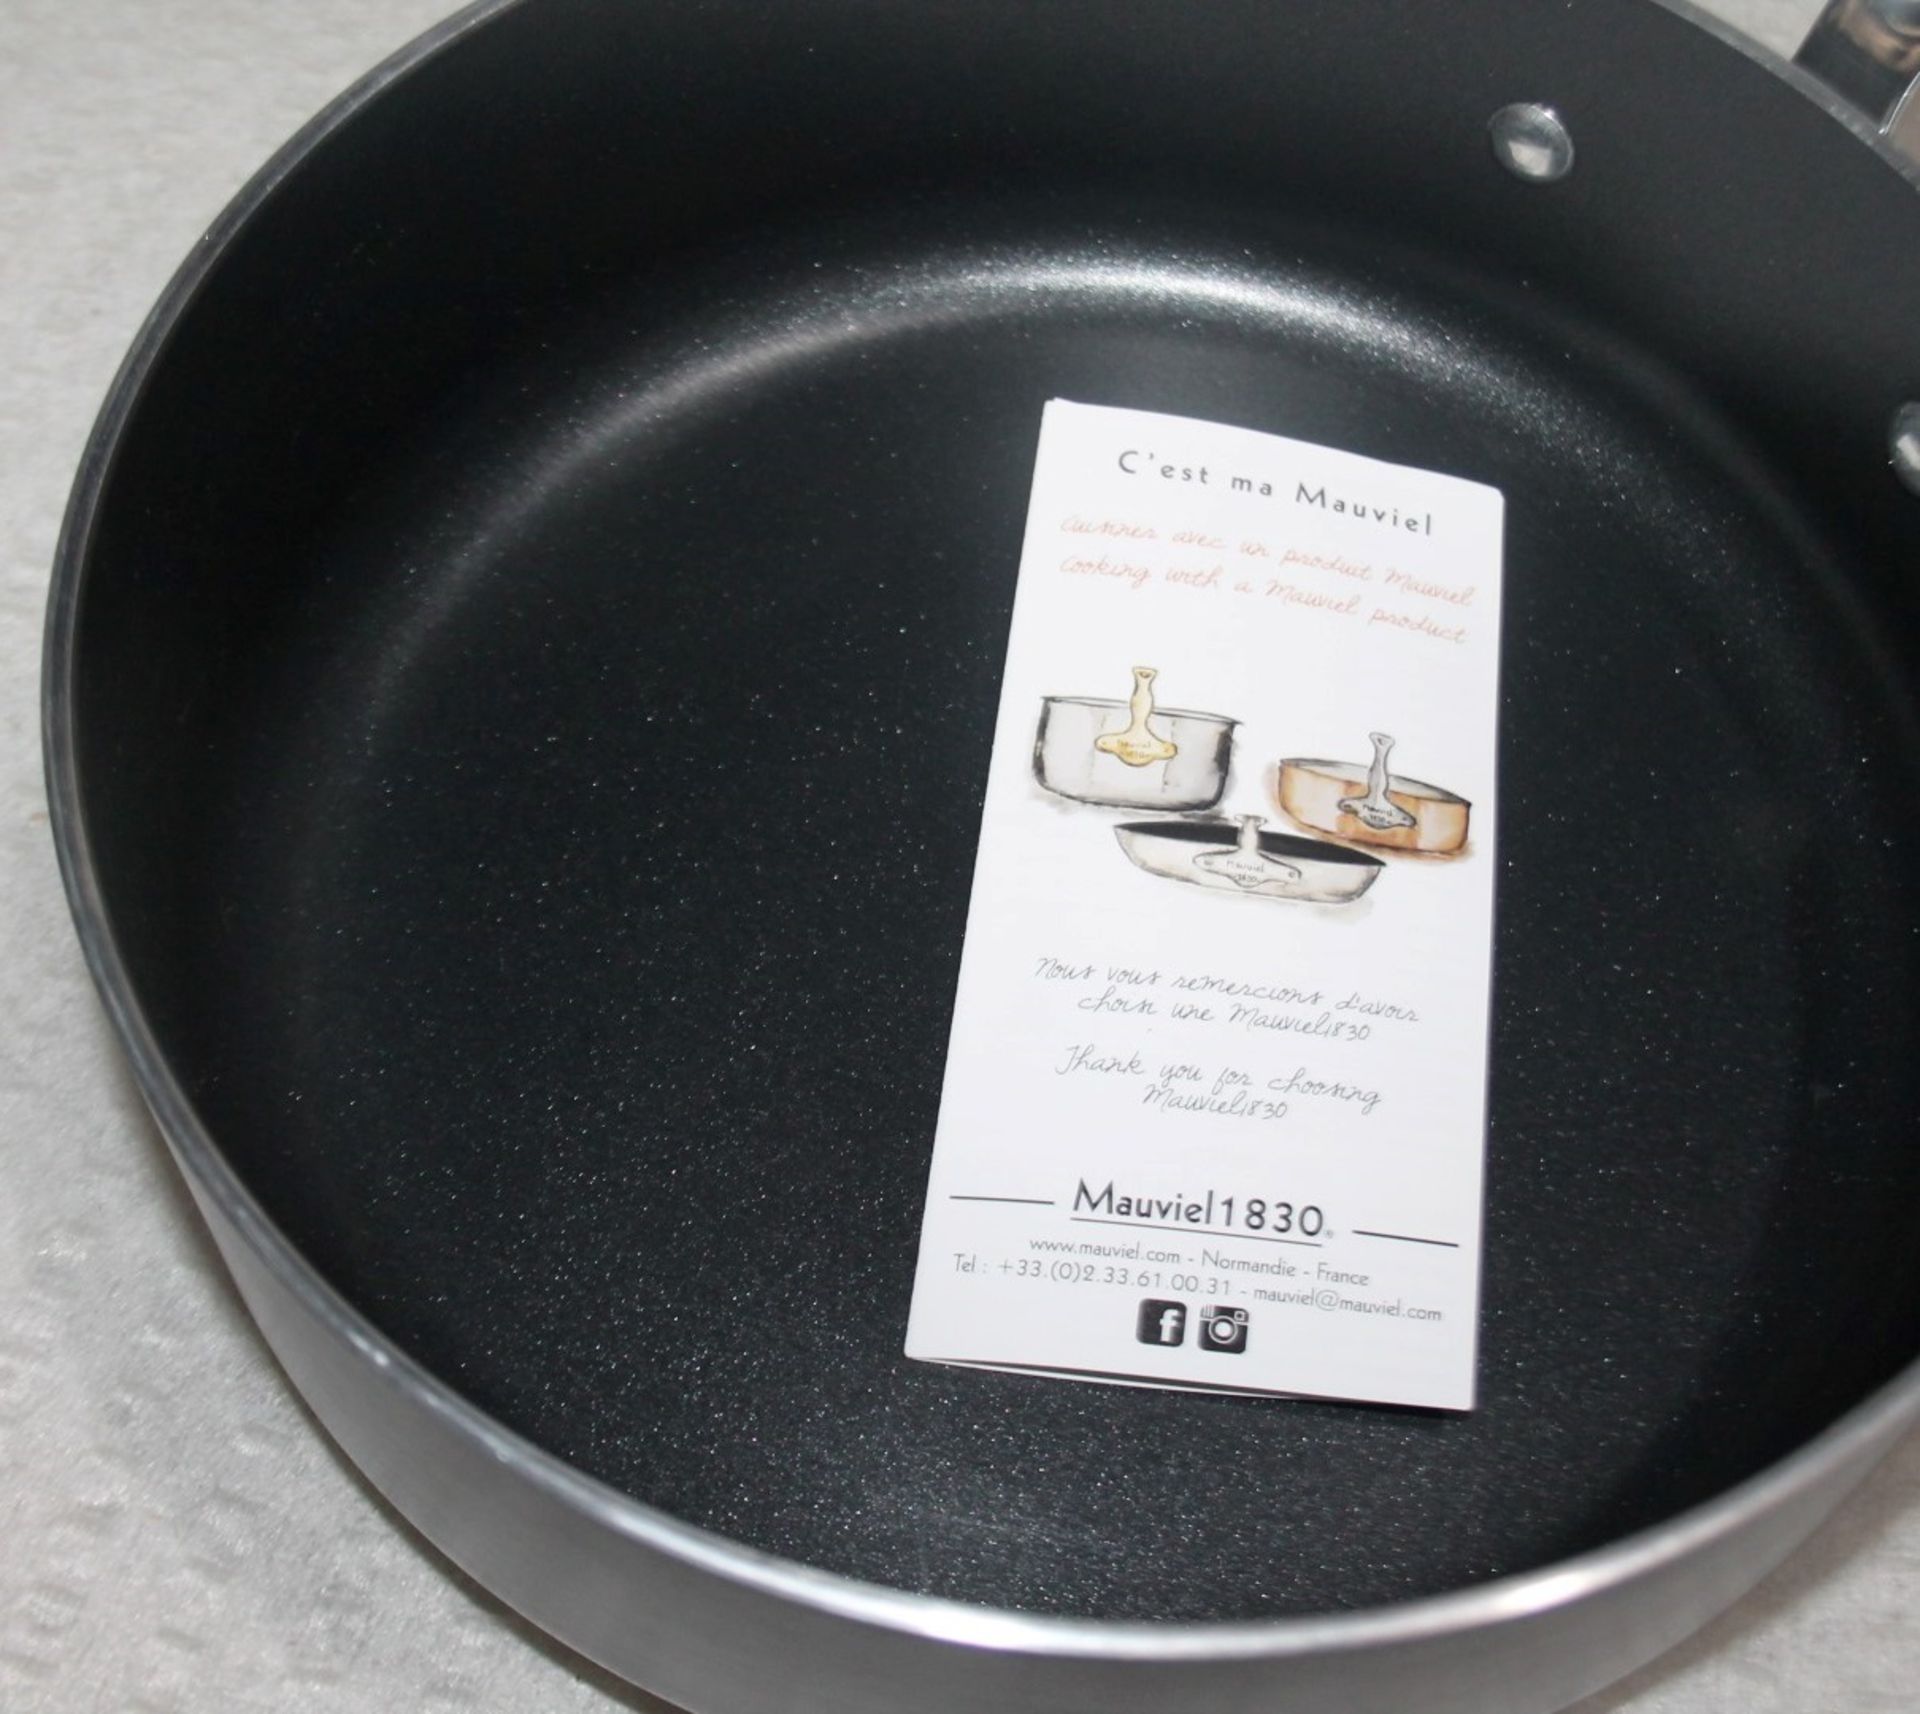 1 x MAUVIEL 'M'Stone' 4-Piece Luxury Cookware Set With Crate - Original Price £599.00 - Unused Boxed - Image 11 of 15